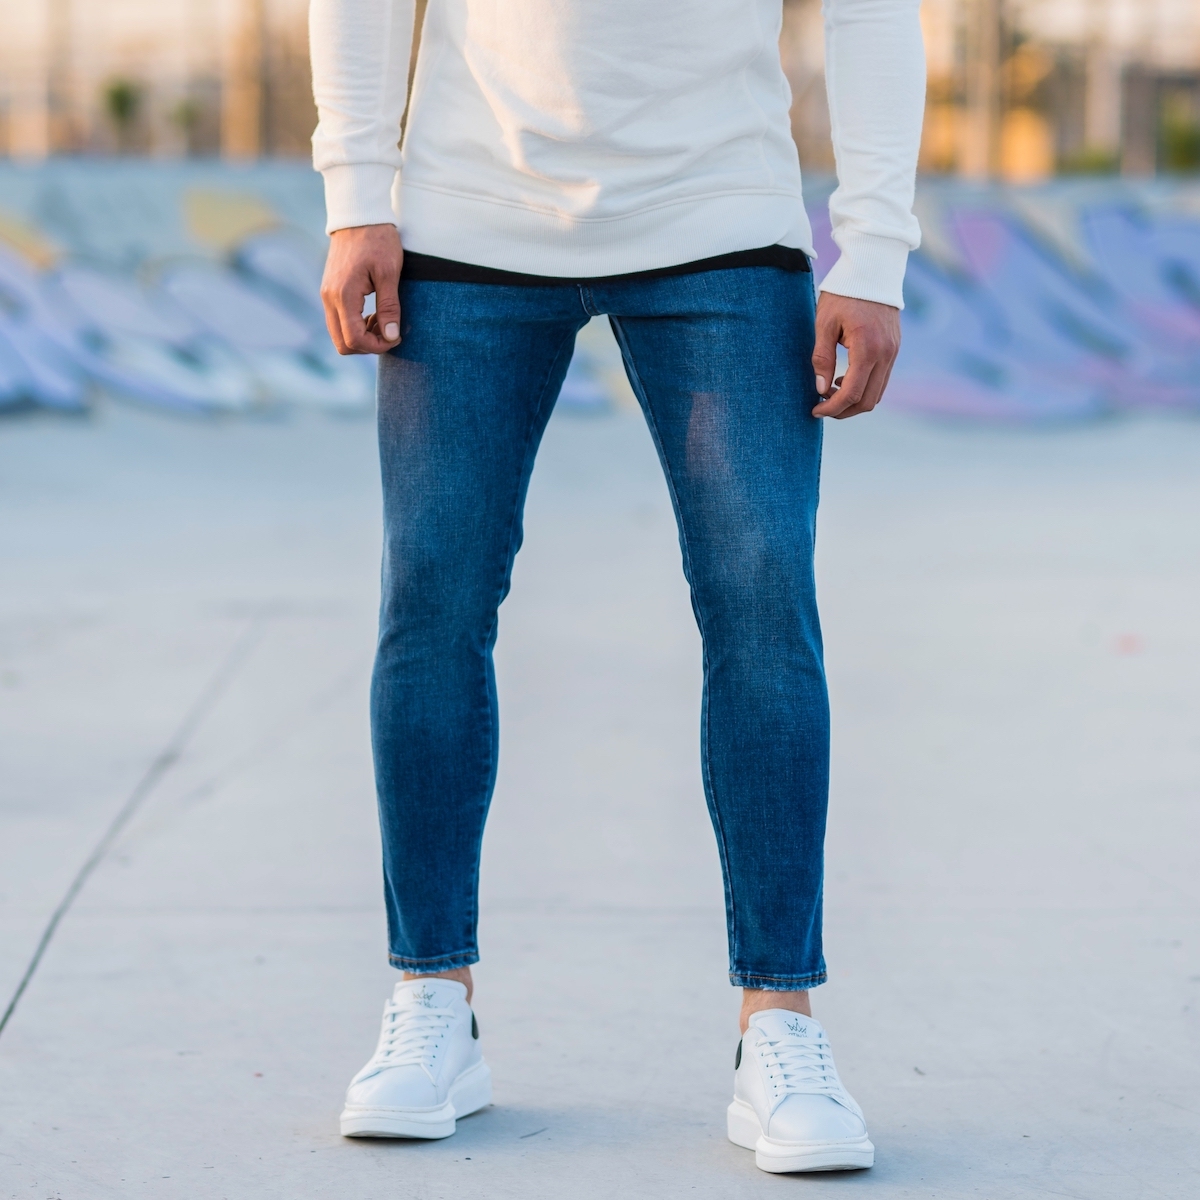 shoes for skinny jeans mens